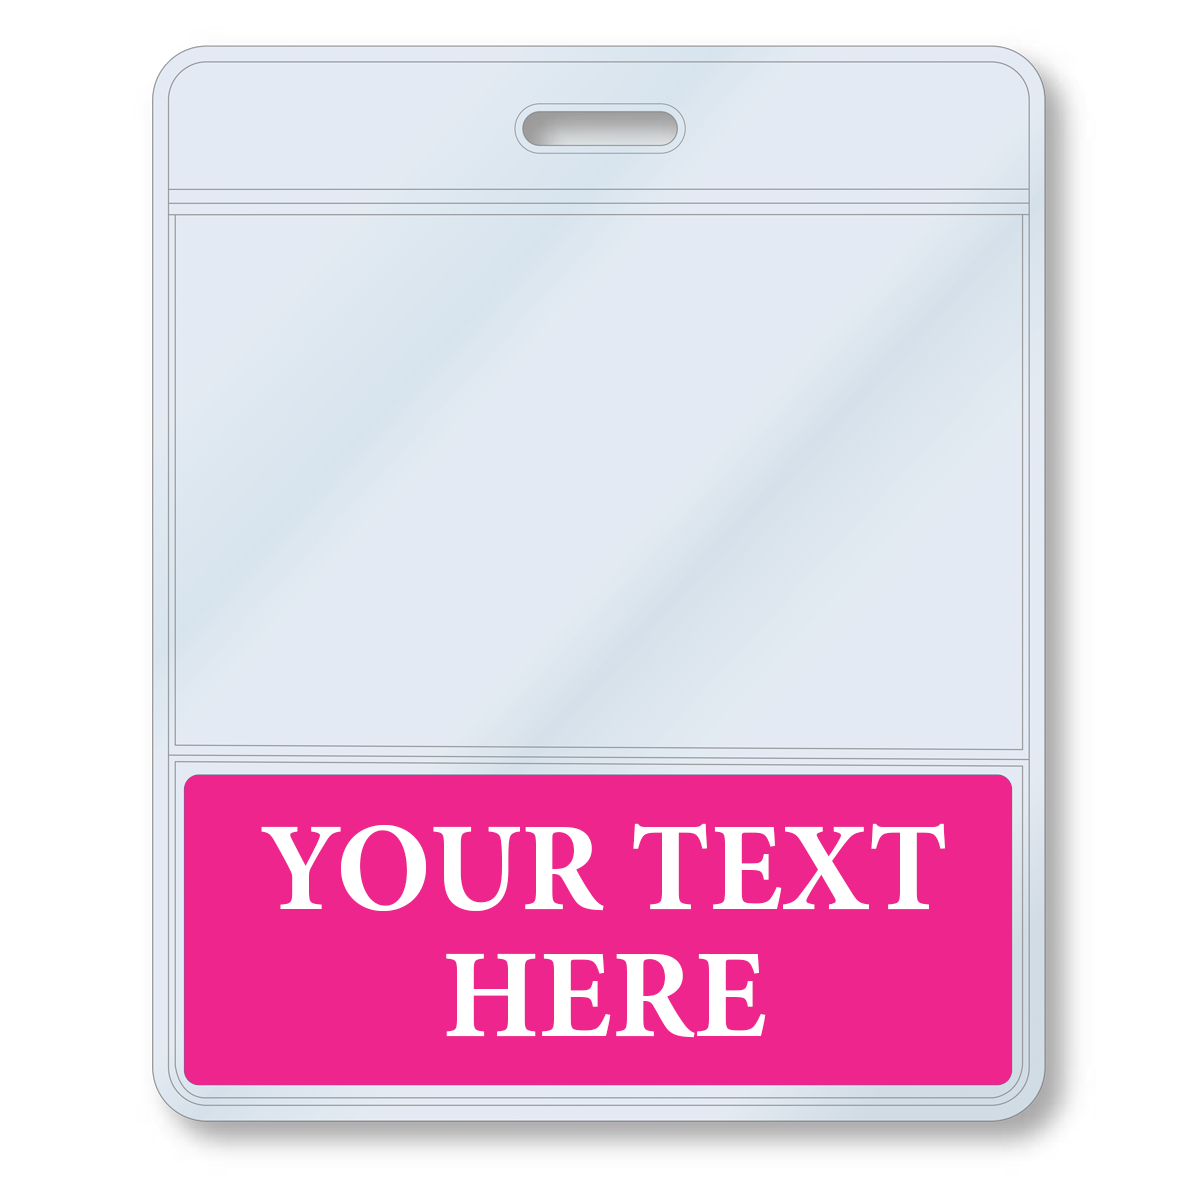 An empty Custom Printed BadgeBottoms® Horizontal (Badge Holder & Badge Buddy IN ONE) with a slot for a lanyard and a pink section at the bottom labeled "YOUR TEXT HERE." This customizable title allows you to personalize your badge with ease.